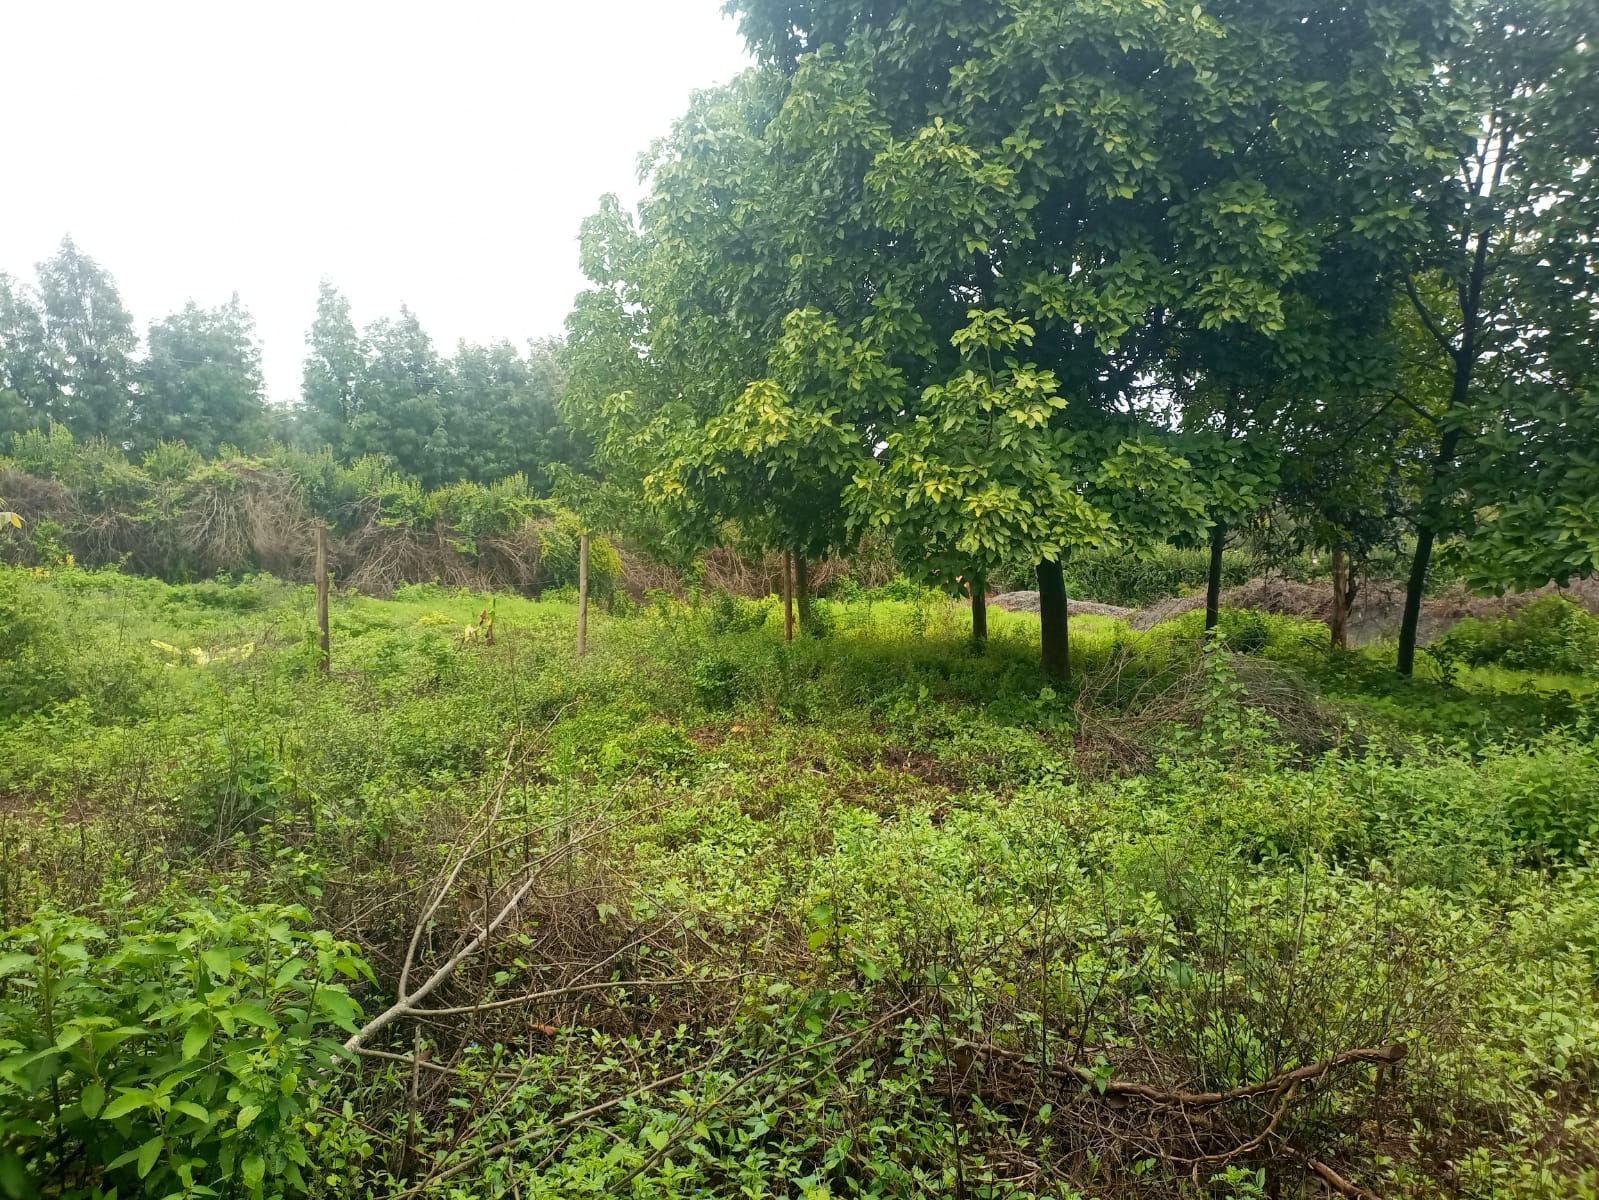 Prime 50x100 Plots in Ngong-Kibiko for Sale. deal Use: Residential. Has water and electricity. fronts tarmac..Title Deed: Ready. price: Kshs 4M Each Musilli Homes